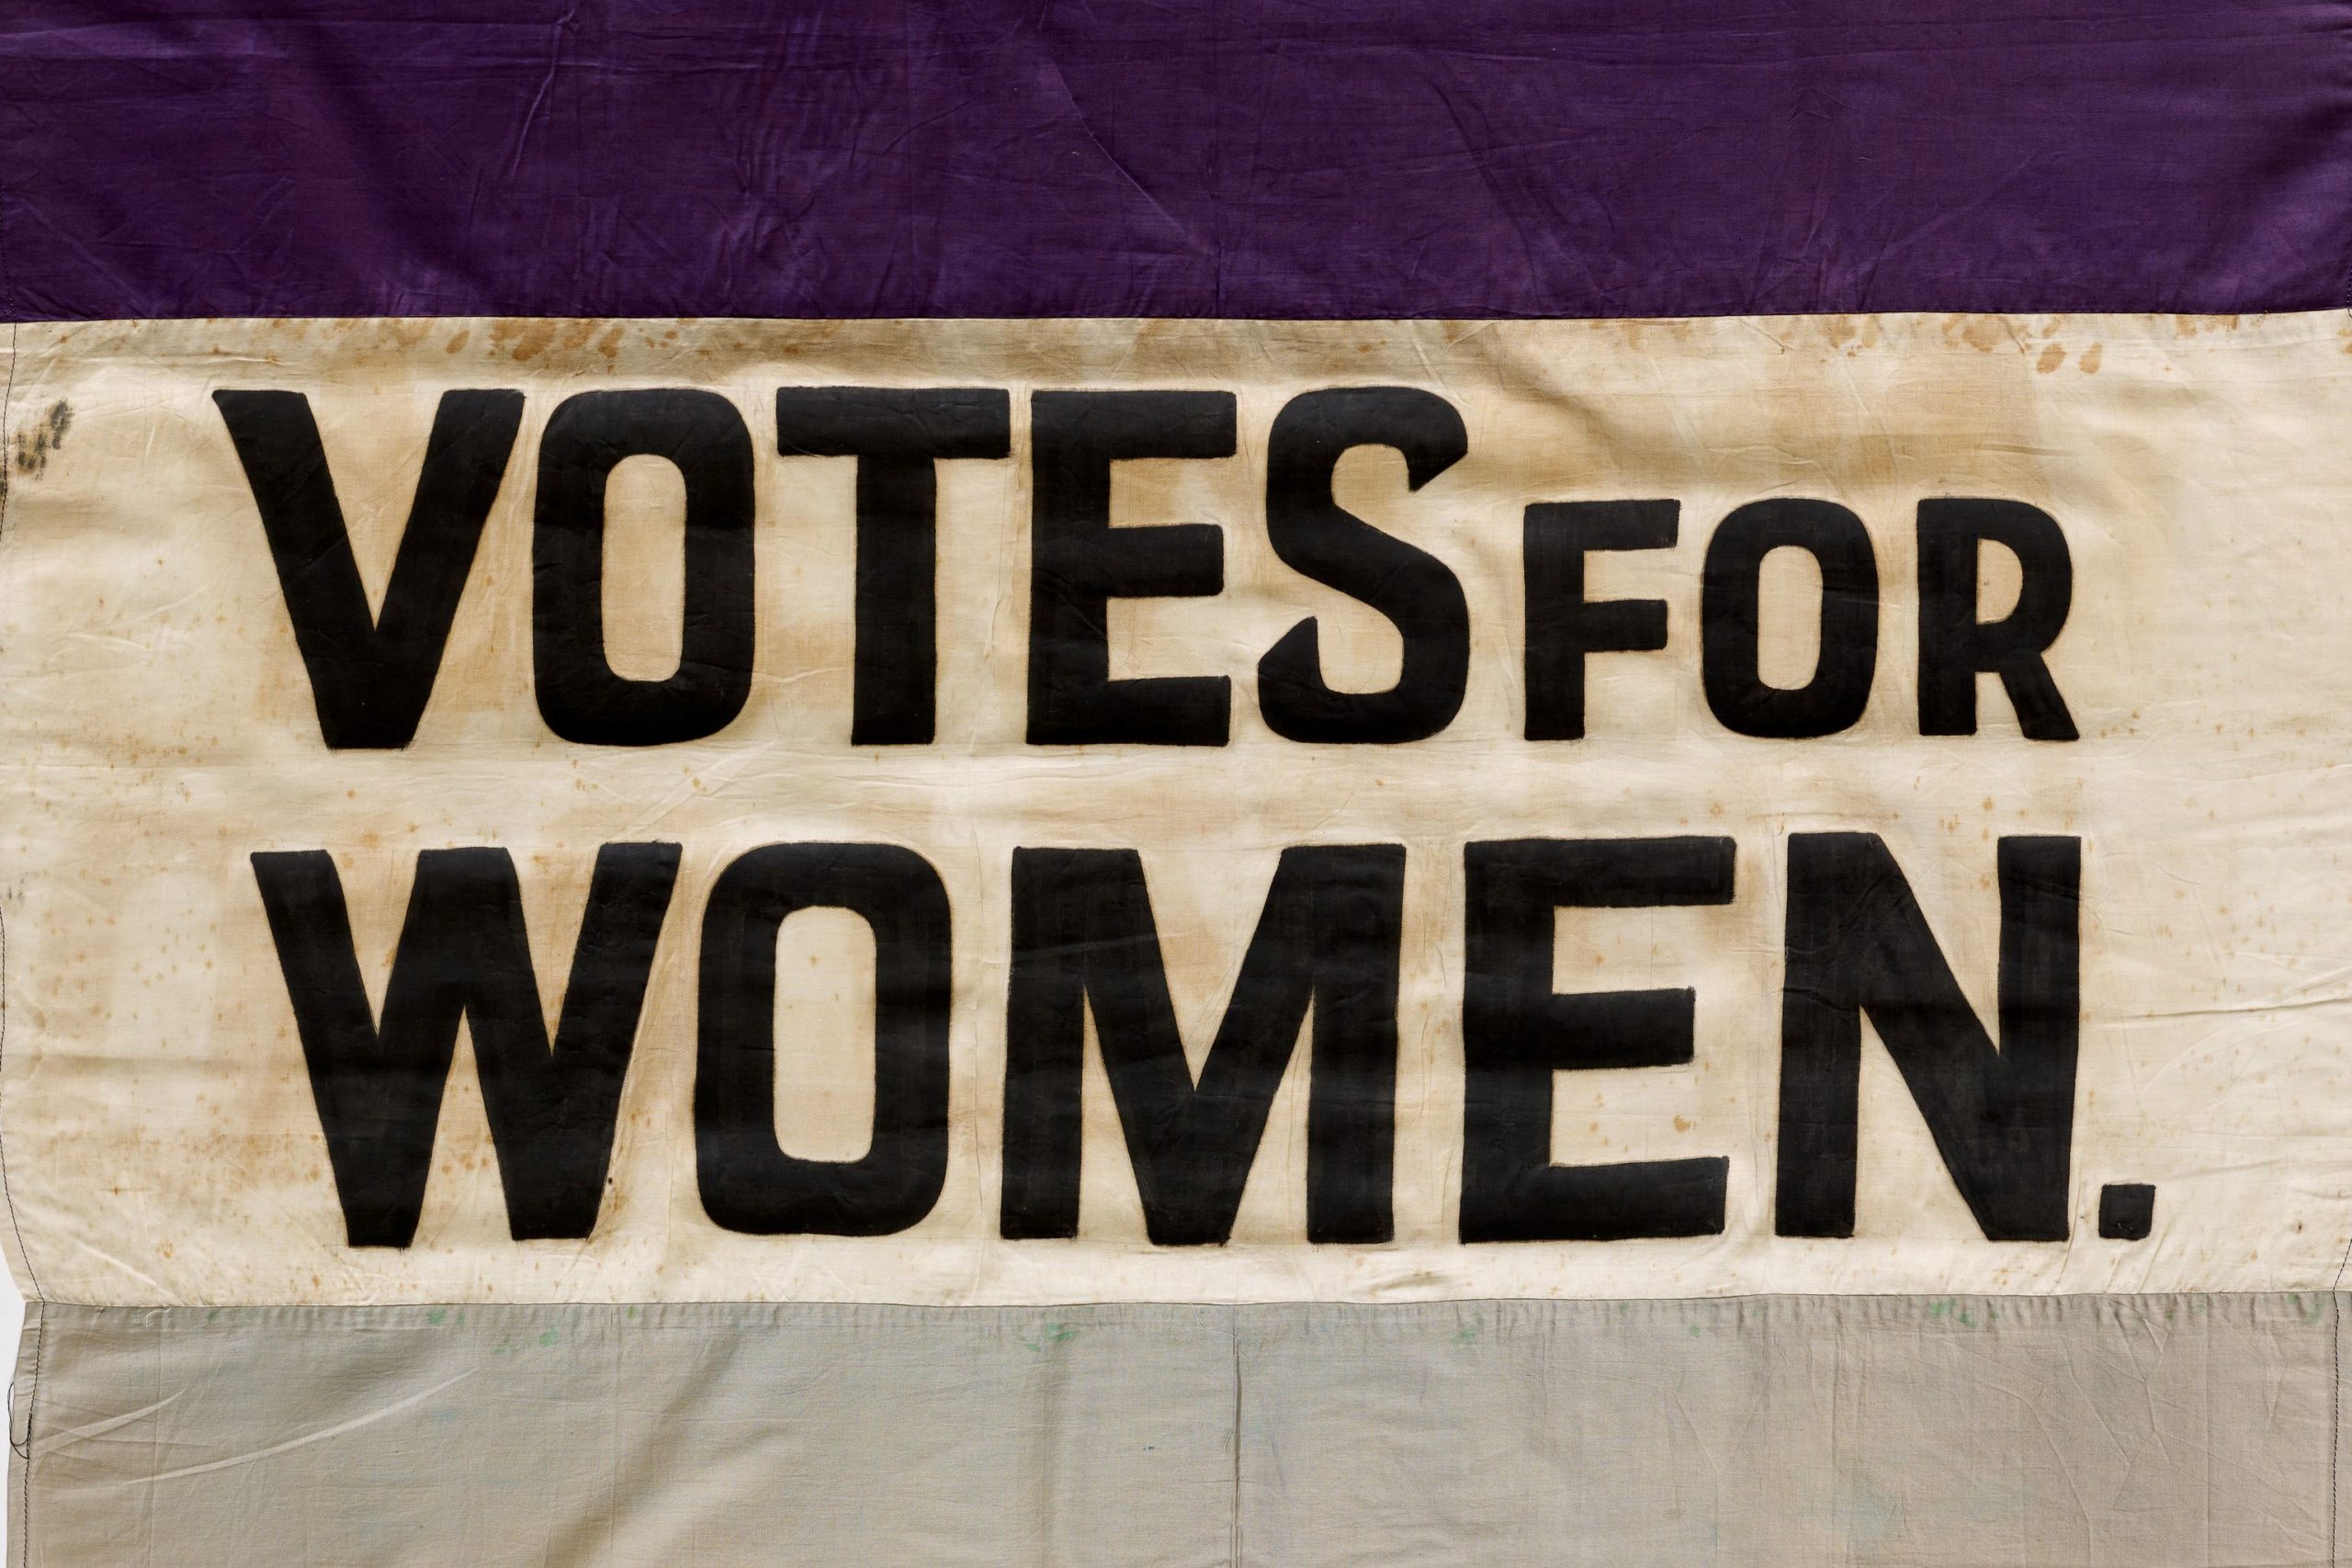 An image of an old banner about women voting.